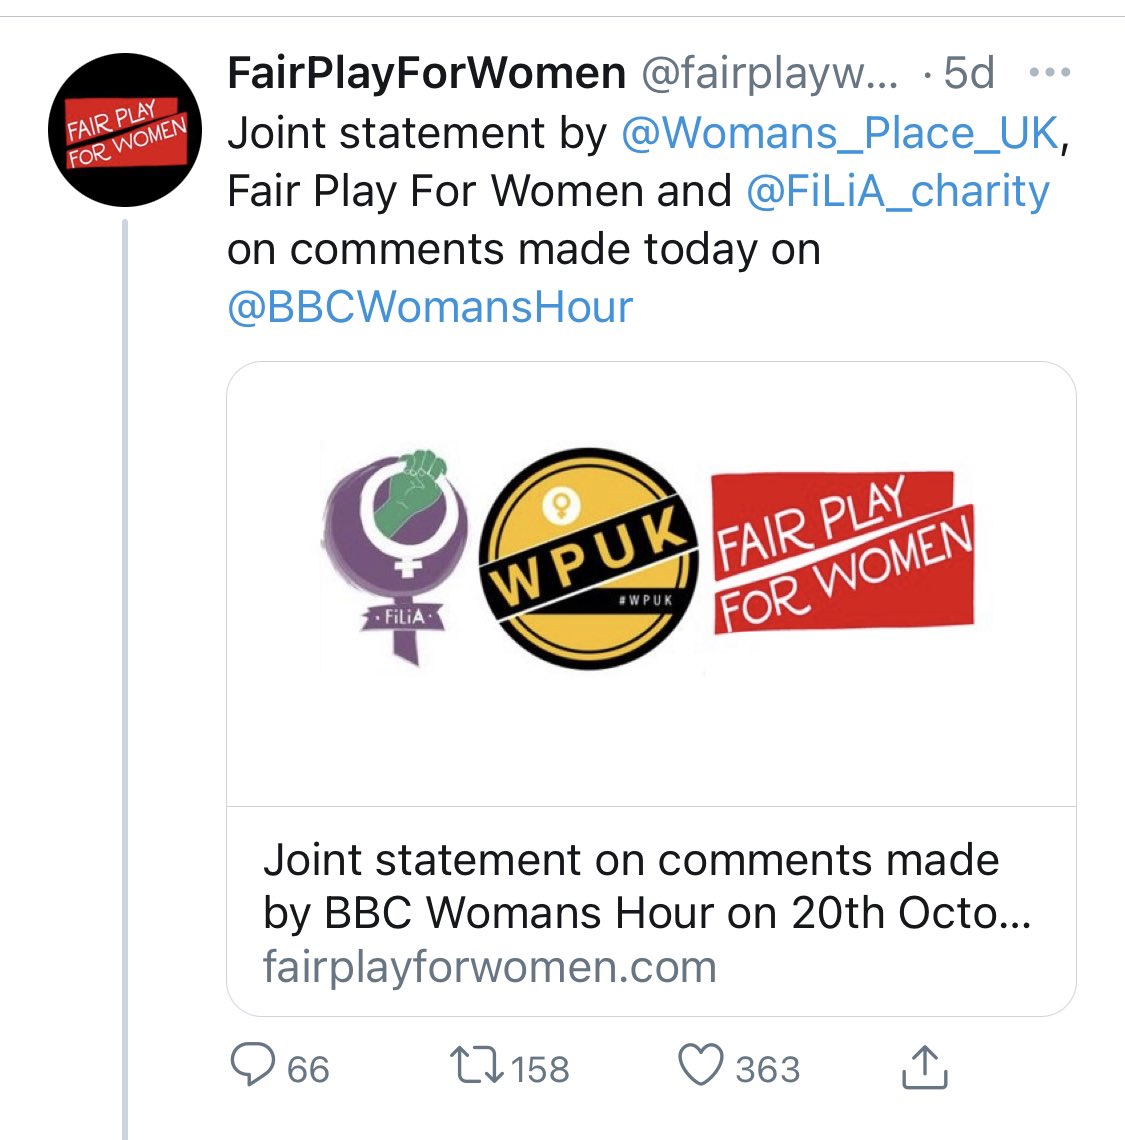 Partnered with  @ObjectUK,  @Filia_Charity is equally as transphobic - as can be seen by their other partnerships and trans-hostile group affiliations.It is the same small group of transphobes who follow, and are represented by, these transphobic platforms.